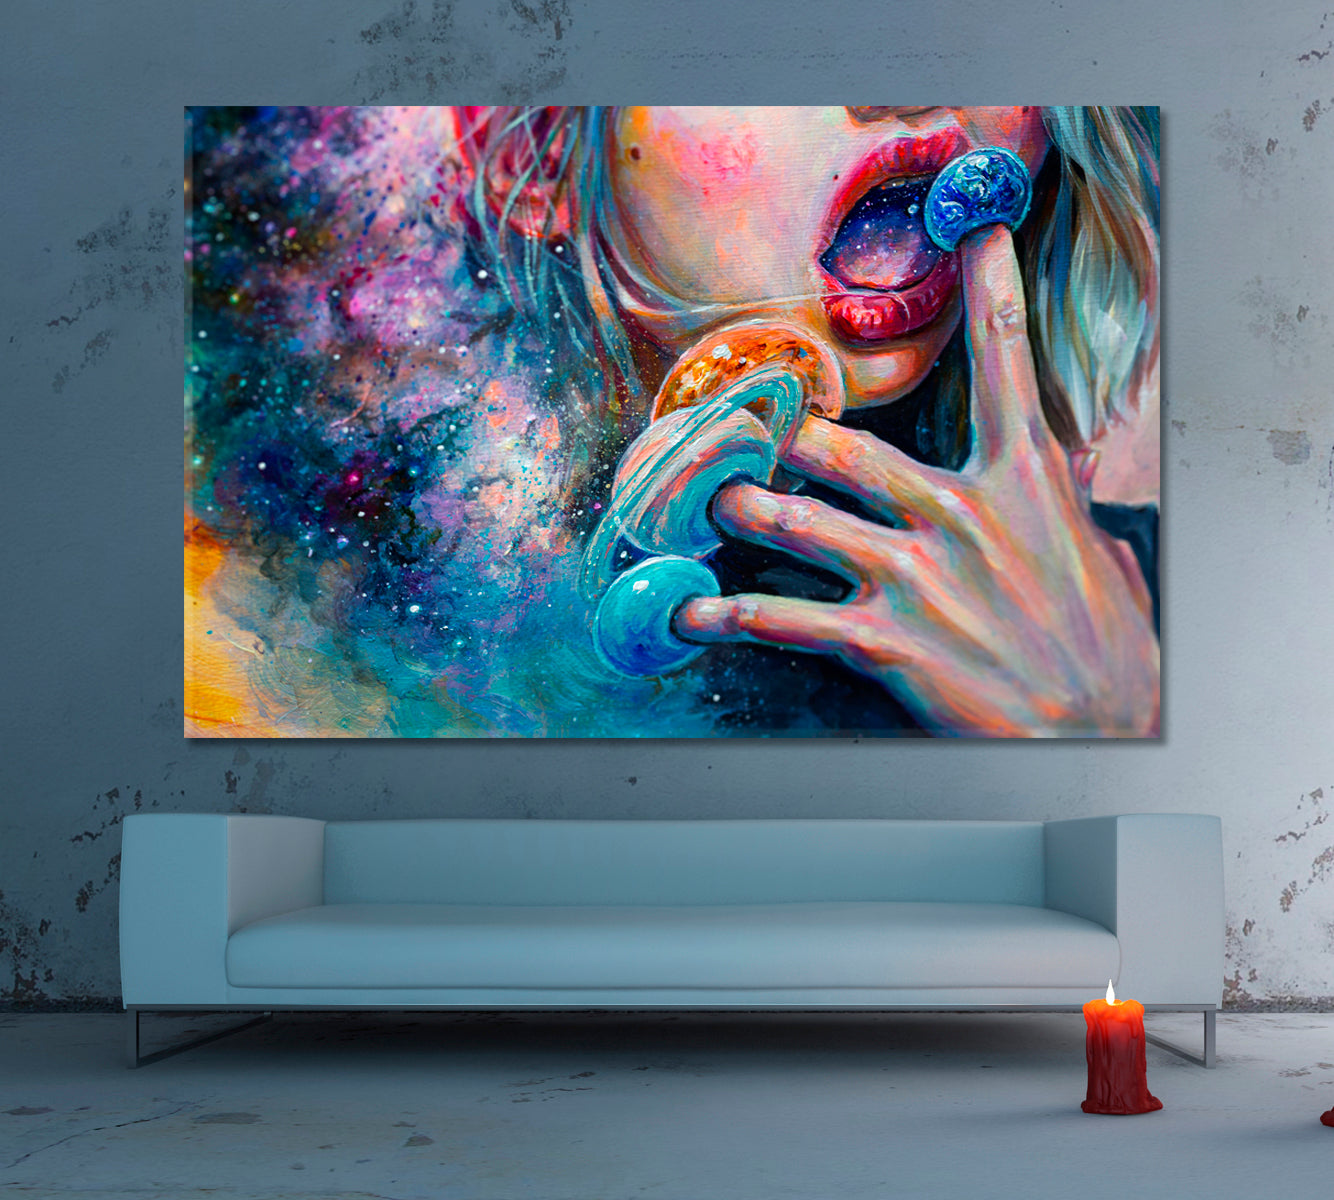 PLANET CREATIONS Trendy Abstract Surreal Psychedelic Mystic Space Surreal Fantasy Large Art Print Décor Artesty 1 panel 24" x 16" 